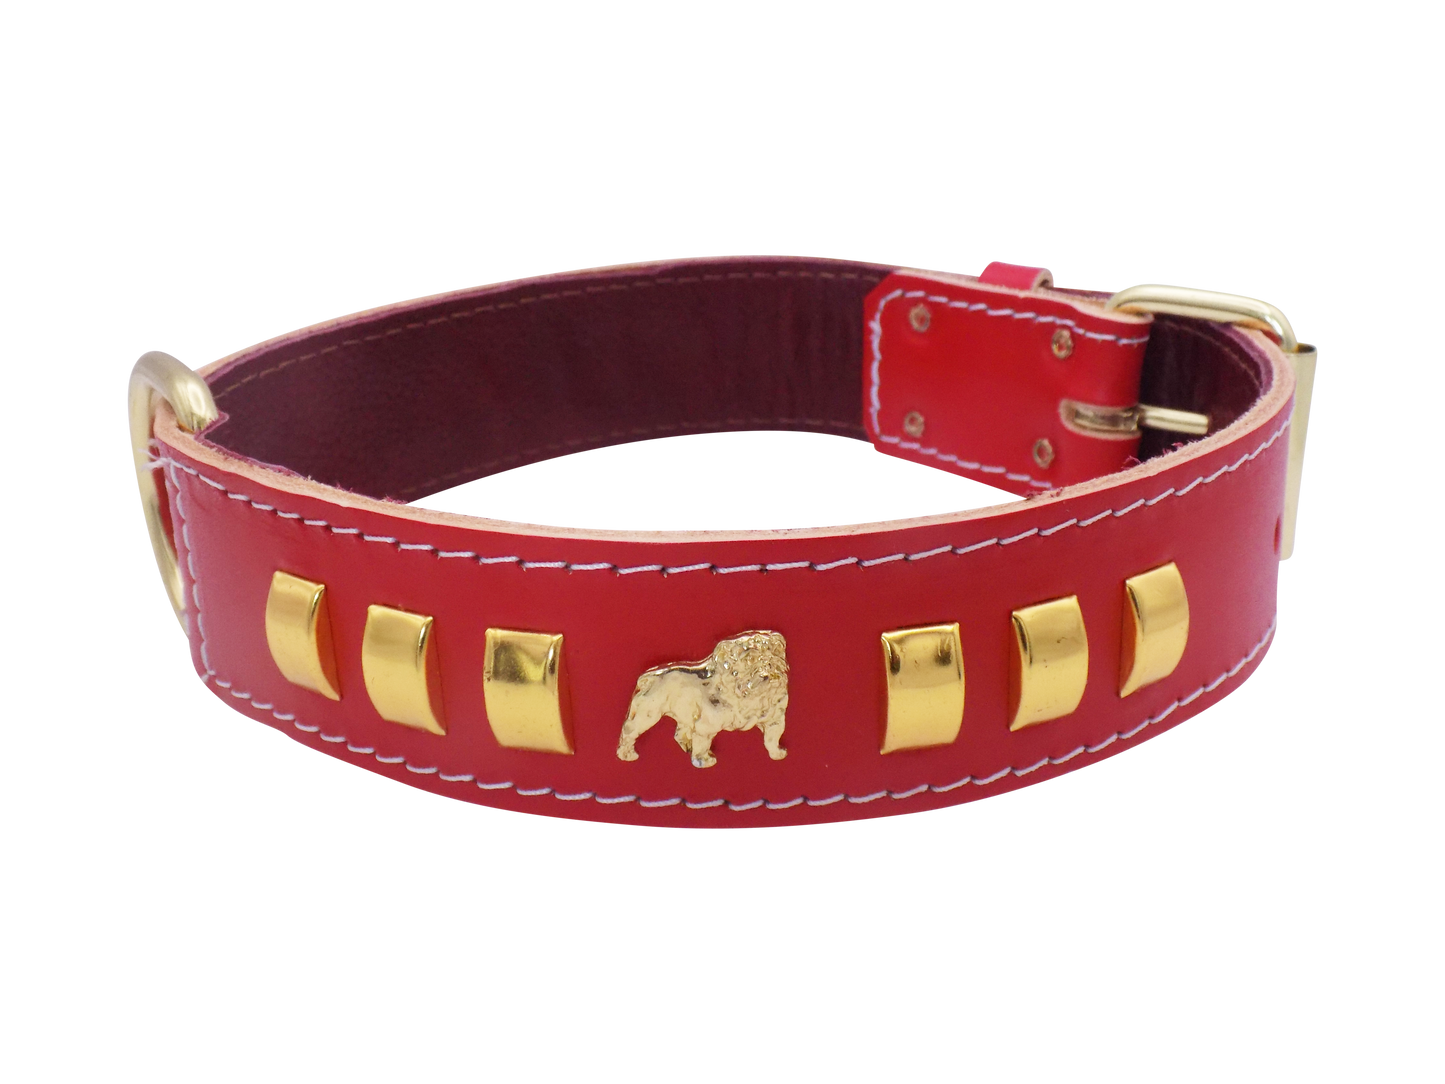 1.5" wide Leather Dog Collar with Unique Gold Design and English Bulldog Badges